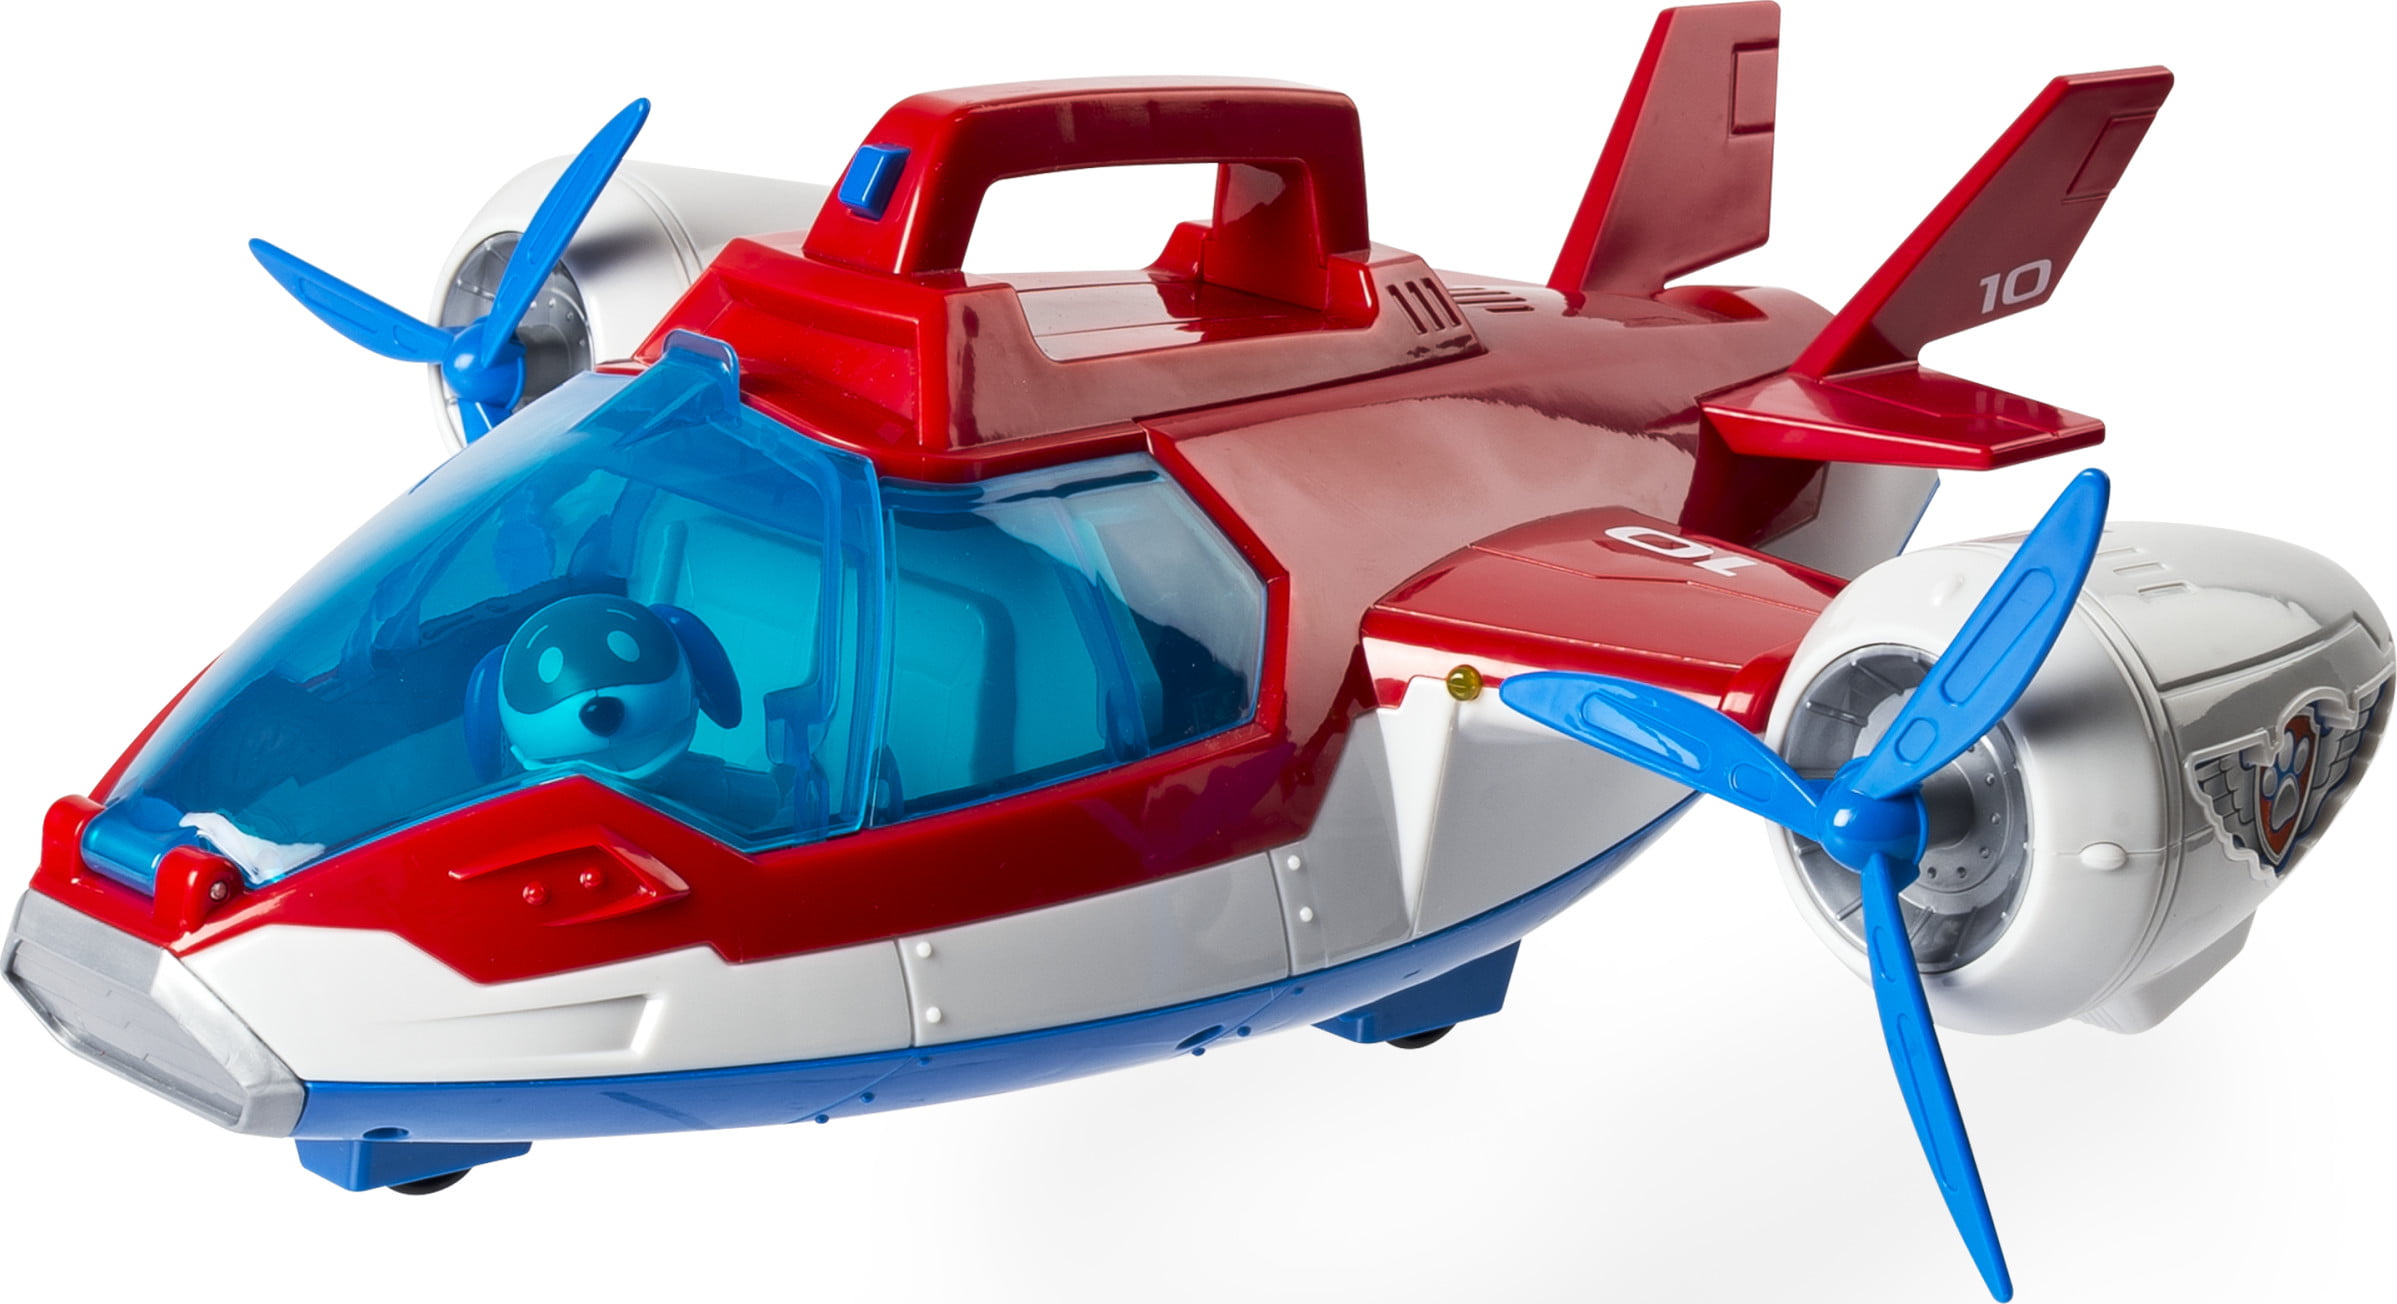 Paw Patrol, Lights and Sounds Air Patroller Plane - 3